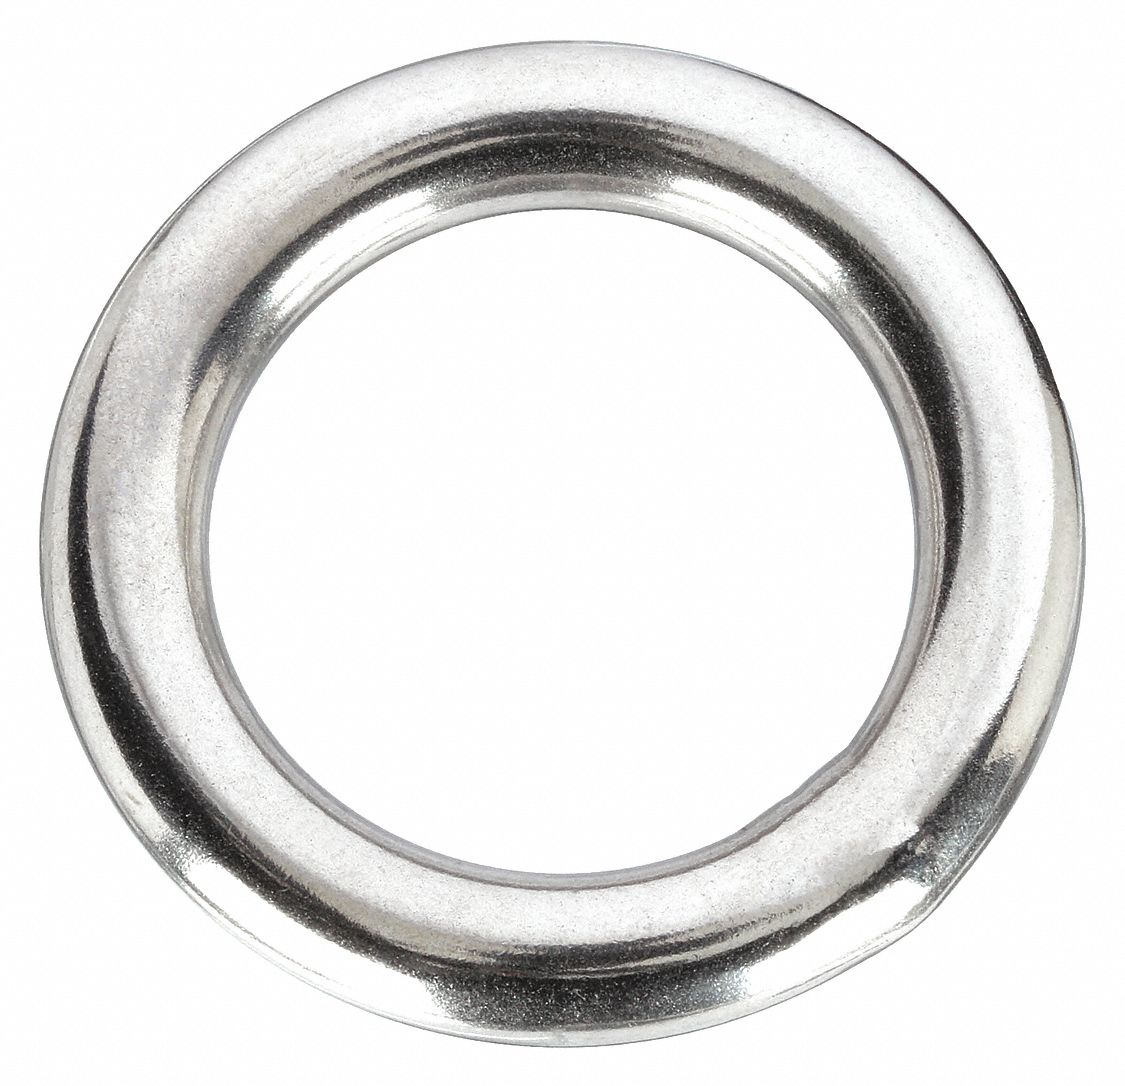 Stainless Steel Welded Rings Select Size 